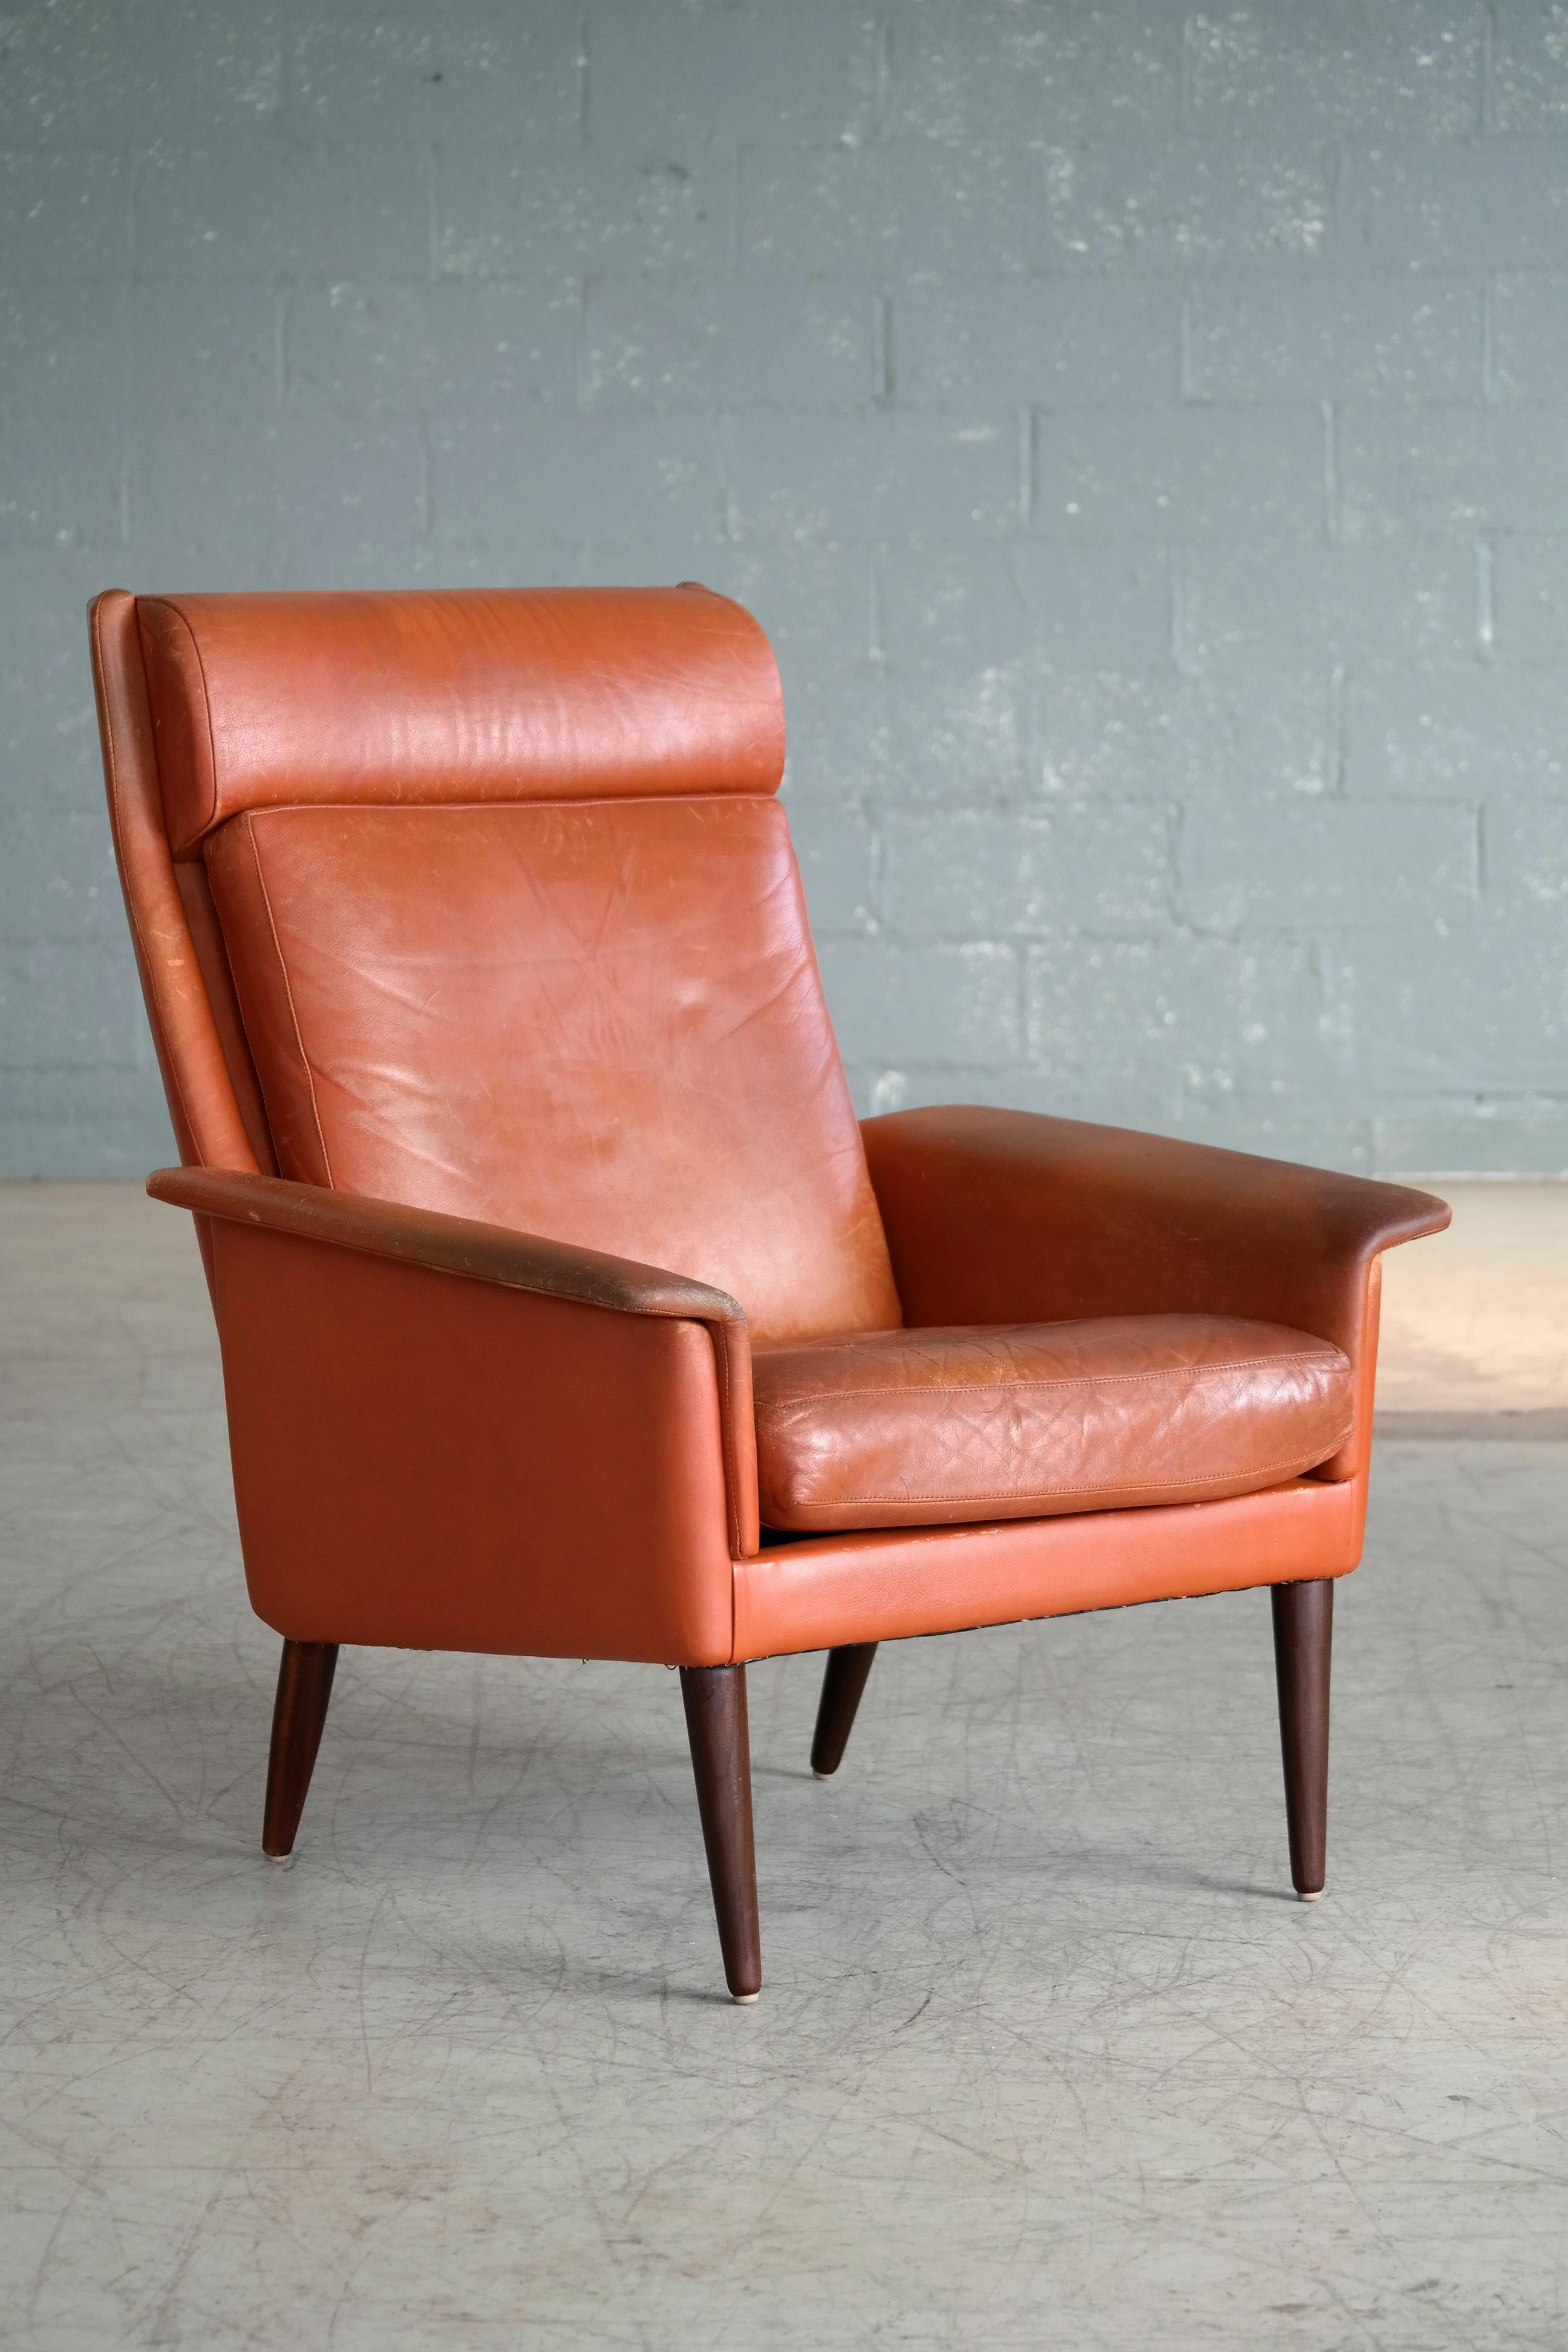 Leather Danish Midcentury Cognac Colored High Back Lounge Chair by Sibast For Sale